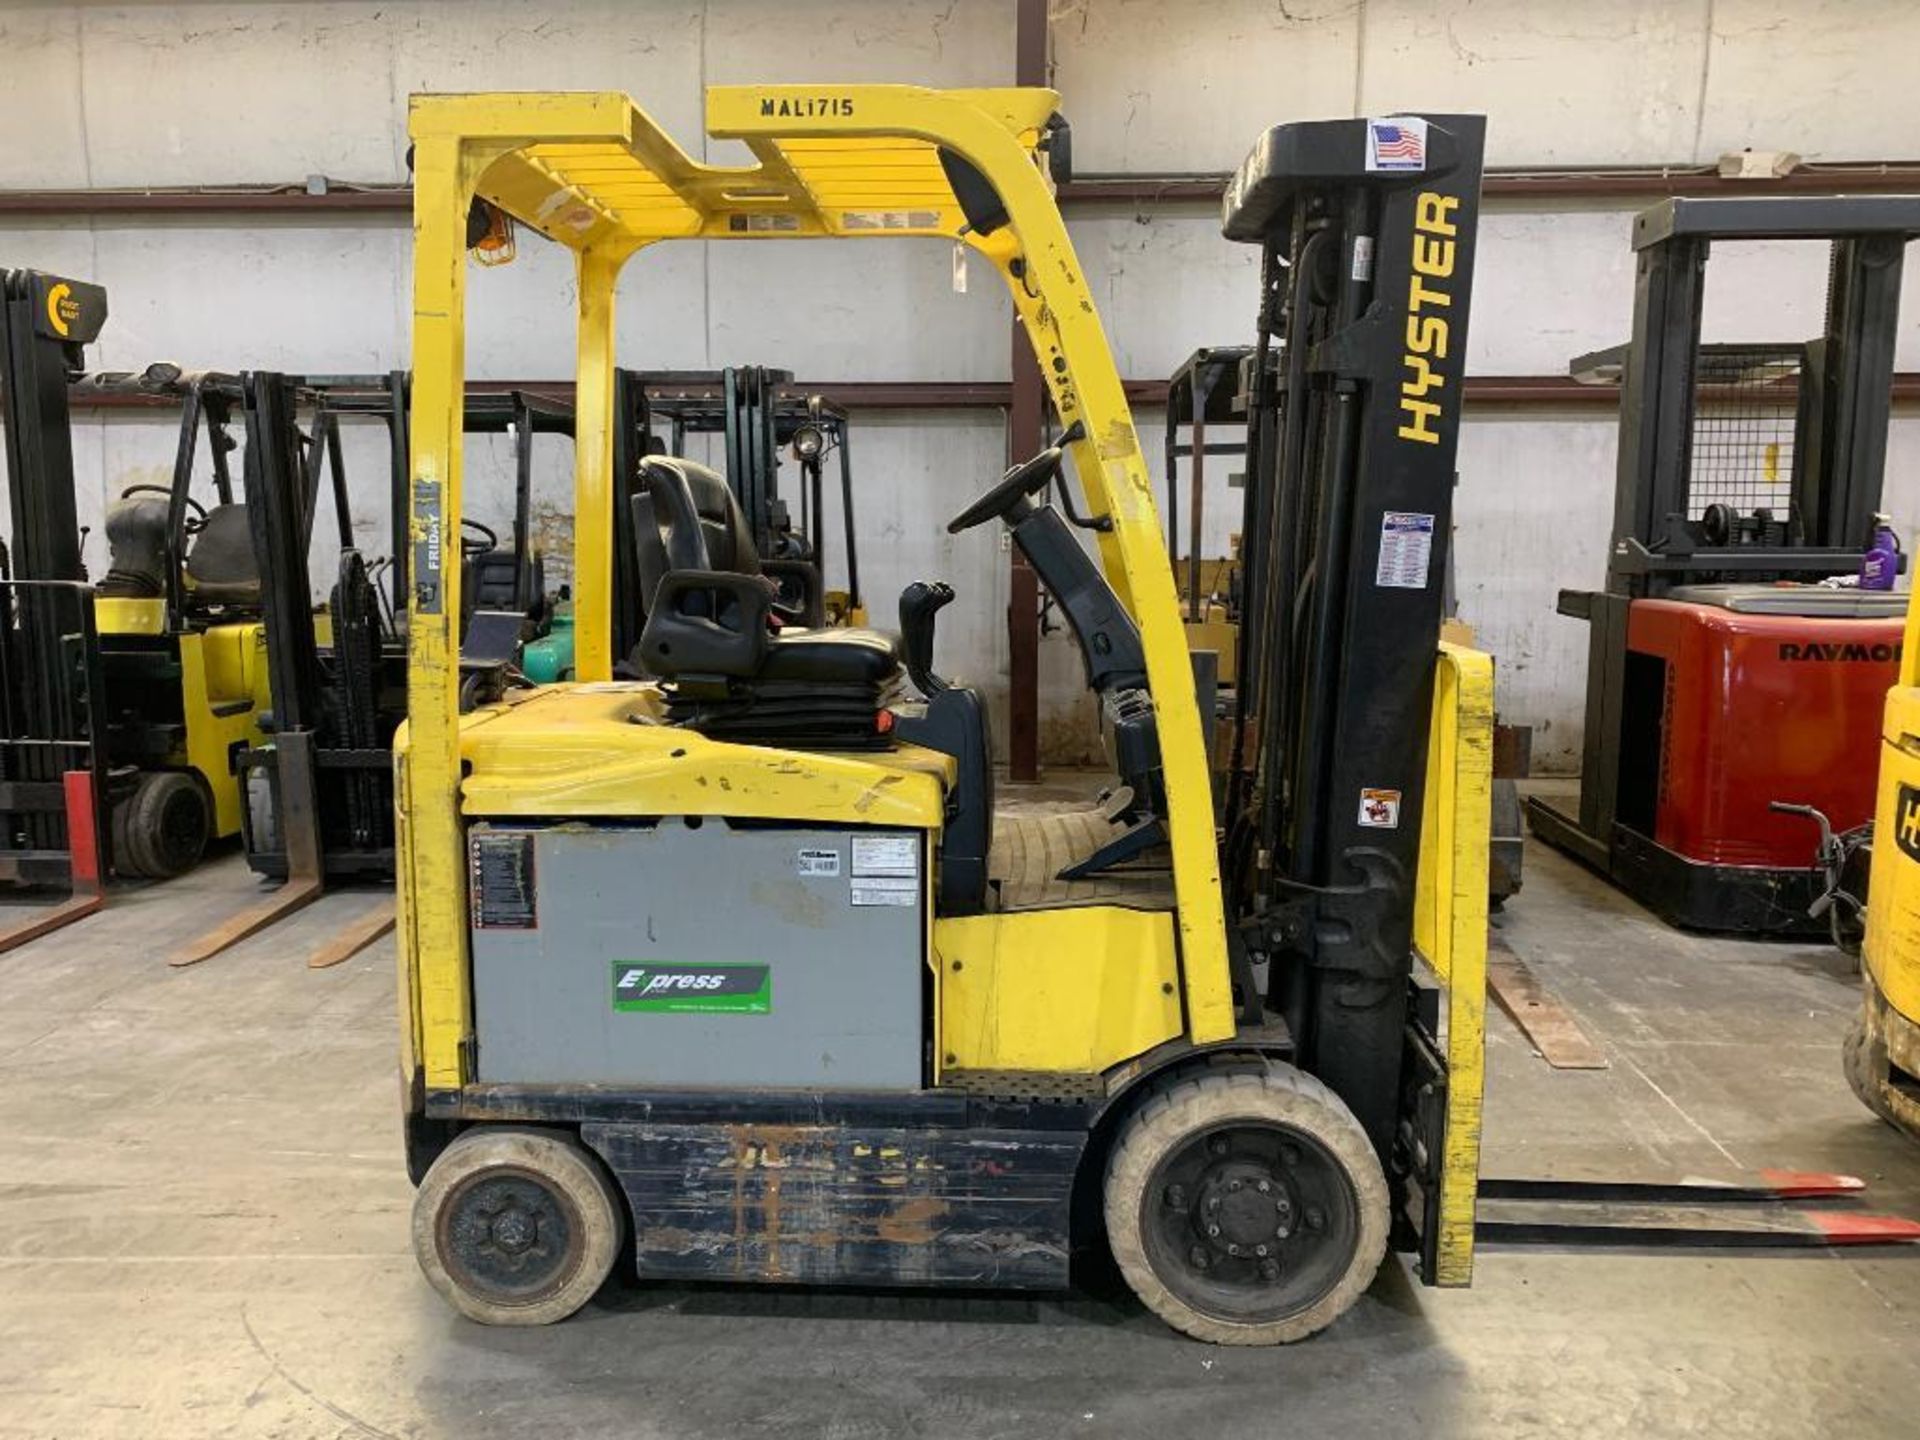 2018 Hyster 5,000 lb. capacity forklift, model e50xn, s/n a268n25056s, 36-volt electric w/ battery,